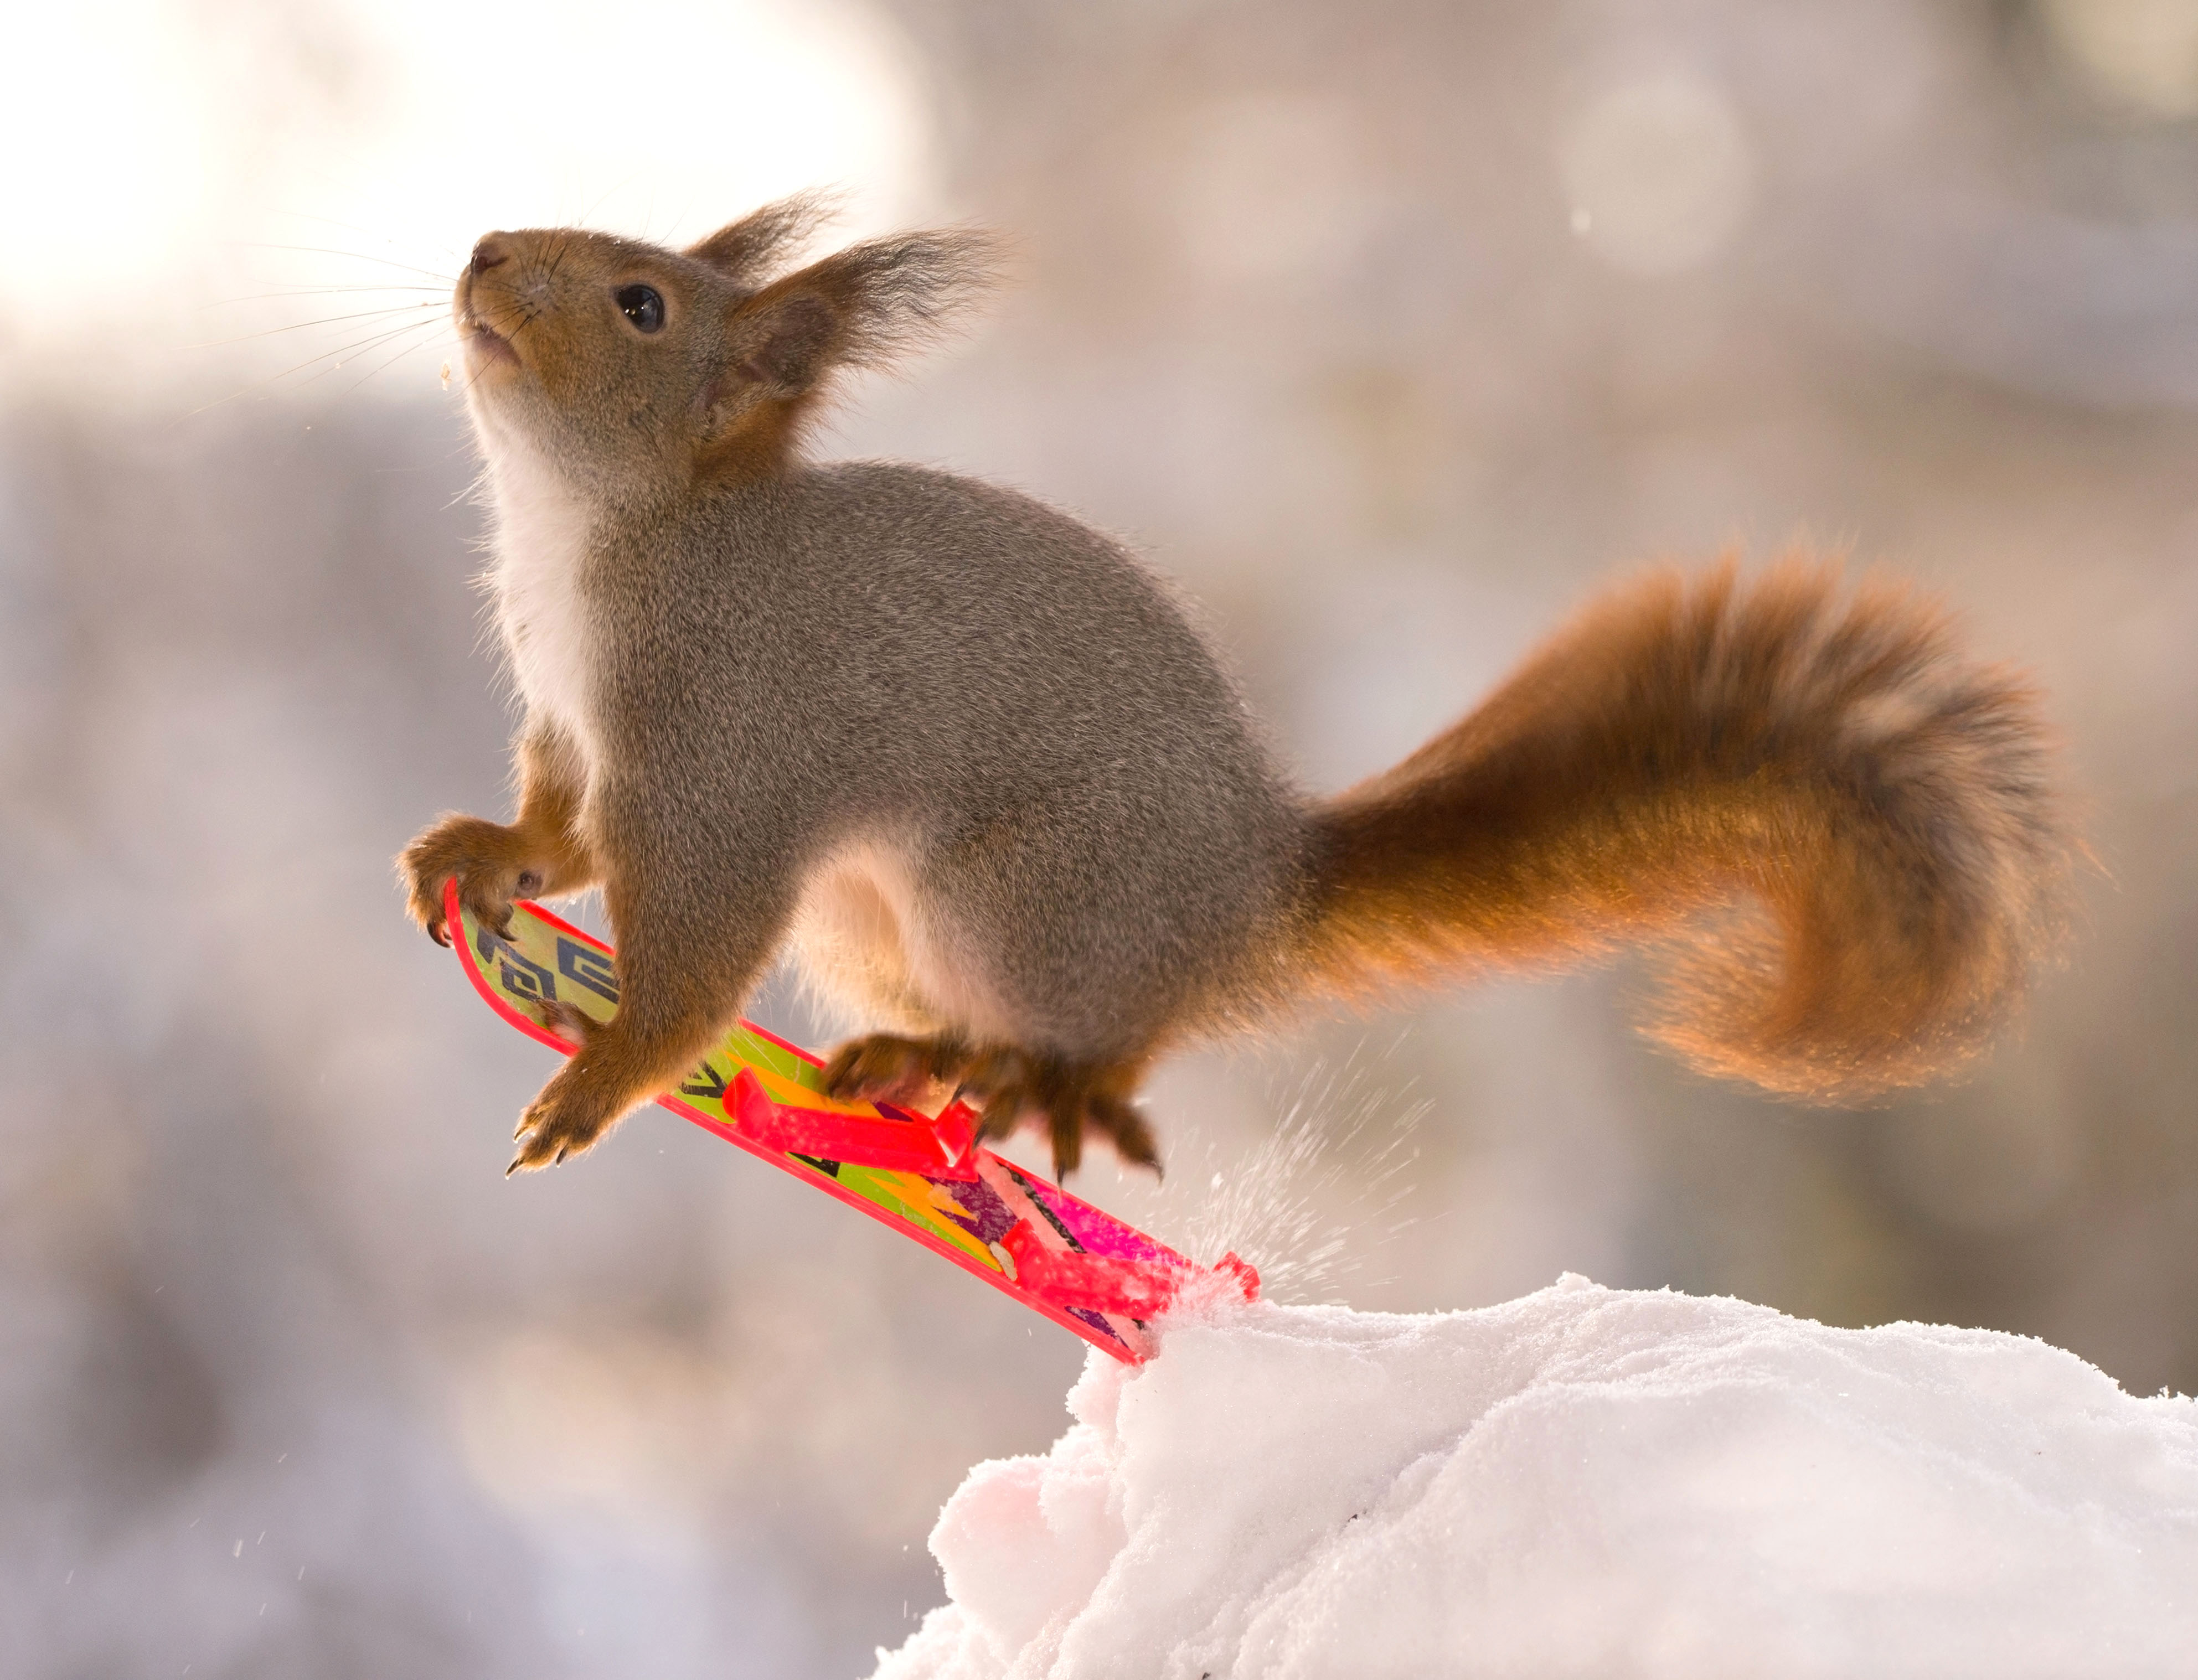 This squirrel is nuts for snowboarding - Storytrender